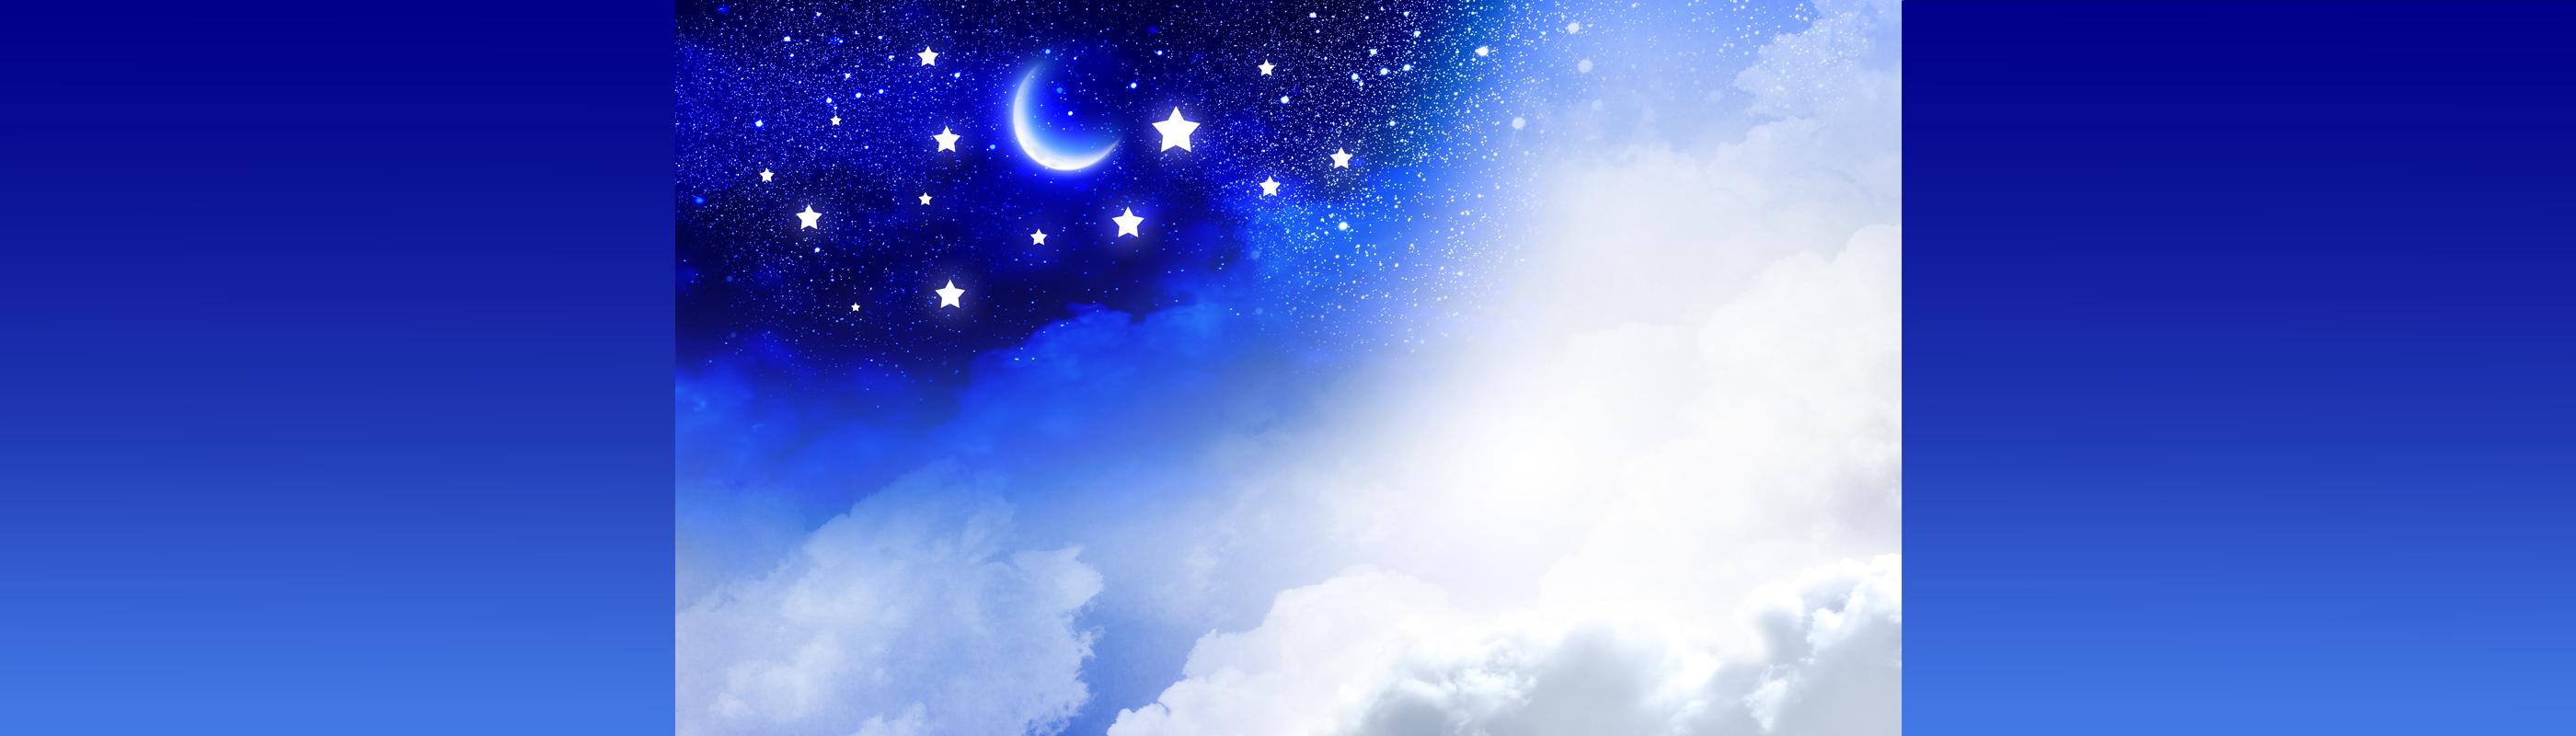 Night sky with stars, moon, and clouds